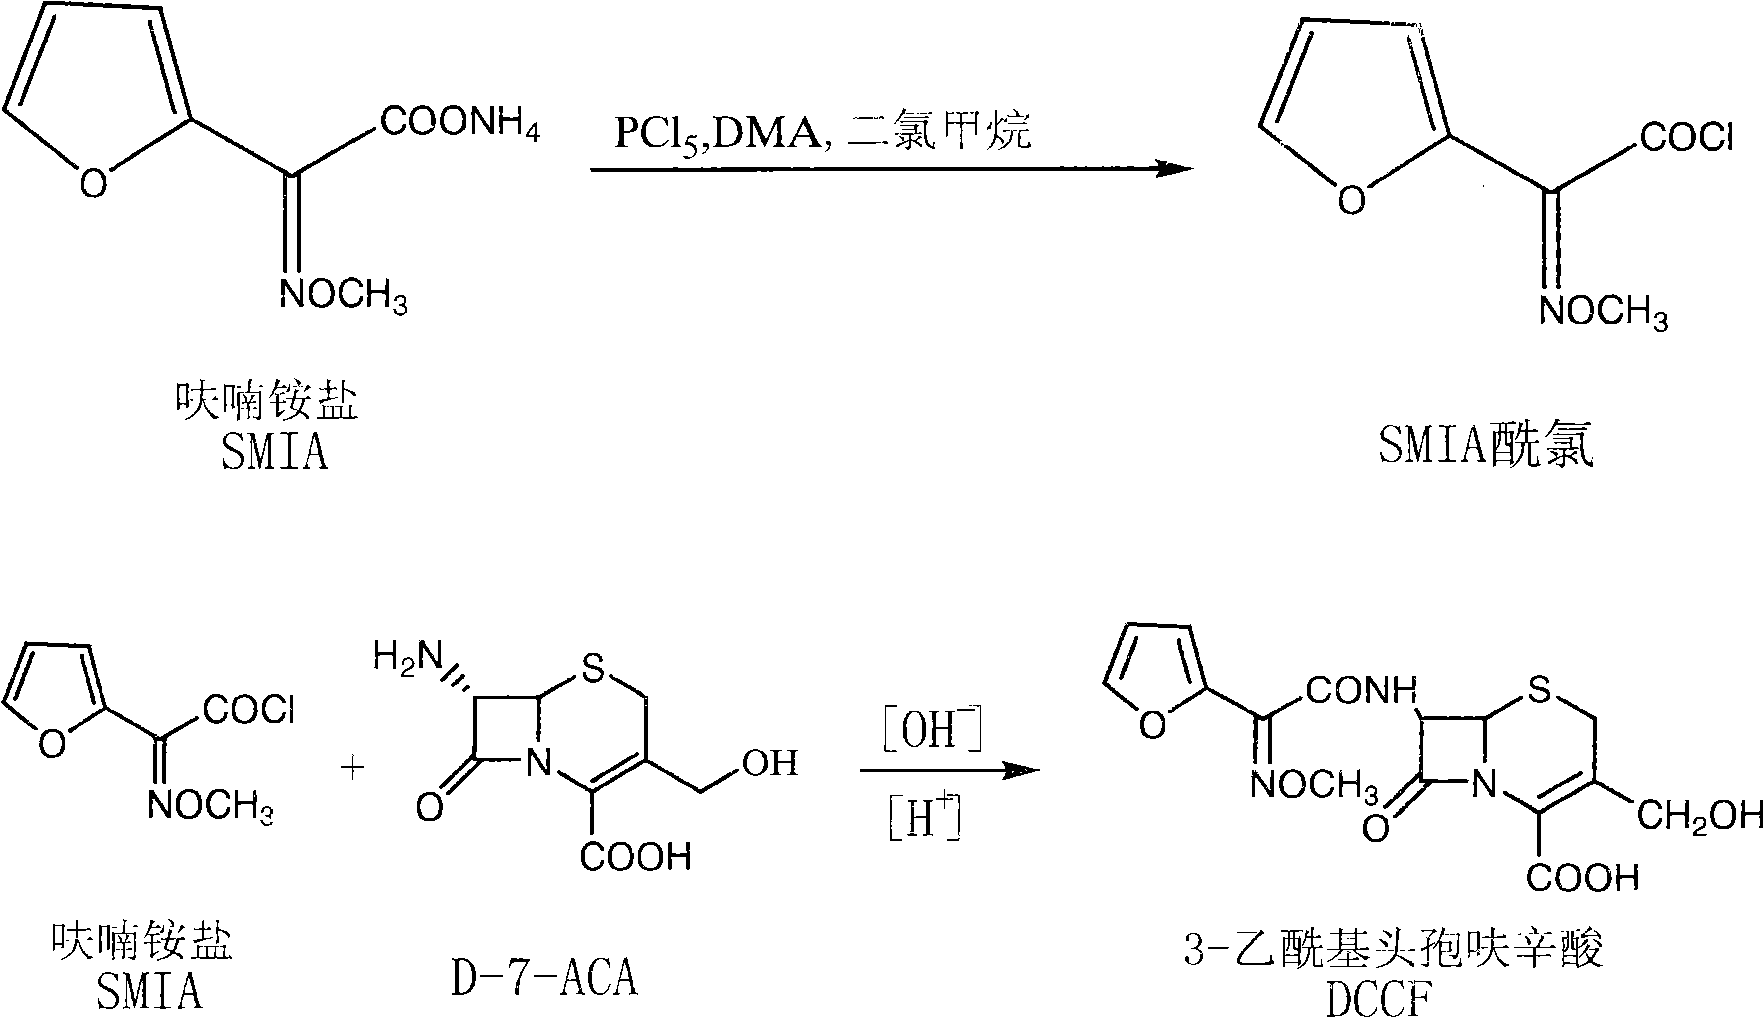 Novel process for synthesizing 3-deacetyl cefuroxime sodium (DCCF)